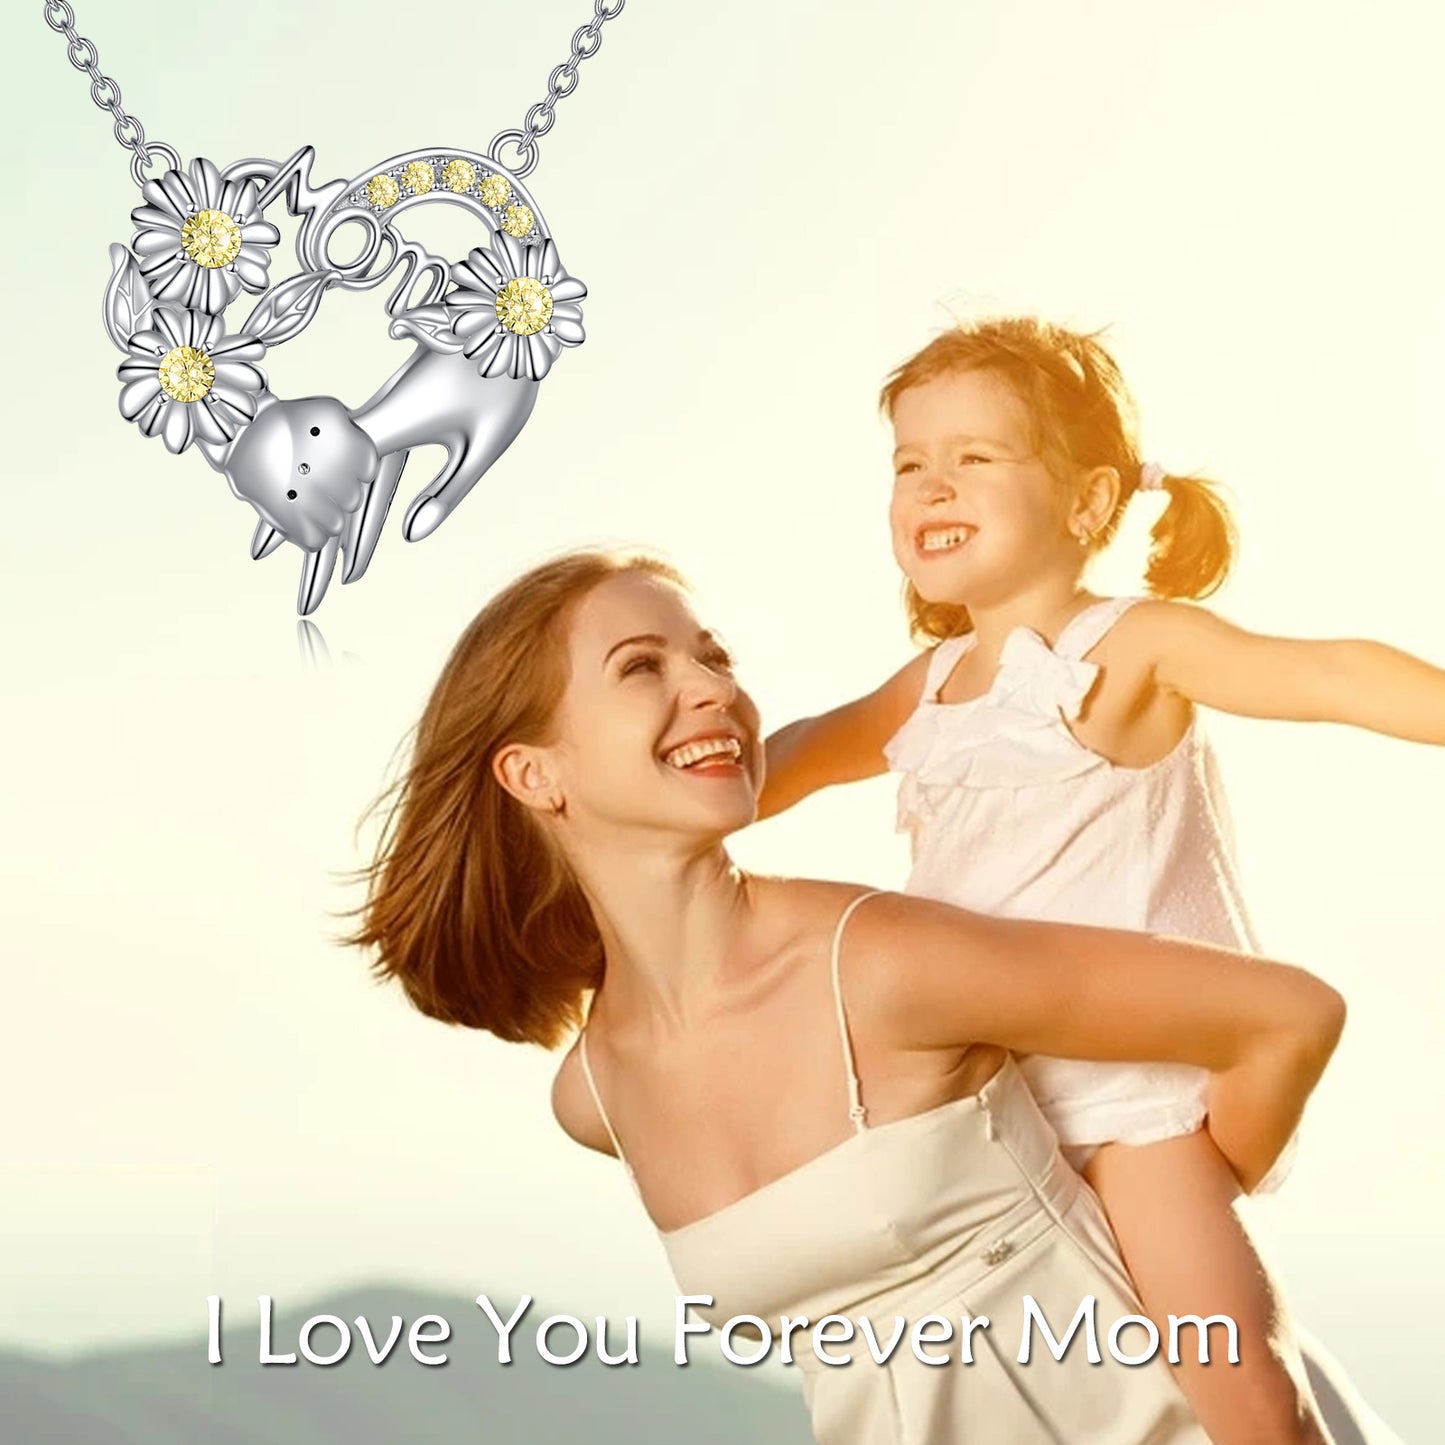 Mum Necklace Sterling Silver Heart Pendant Jewelry for Women - 0.83*0.86 inches